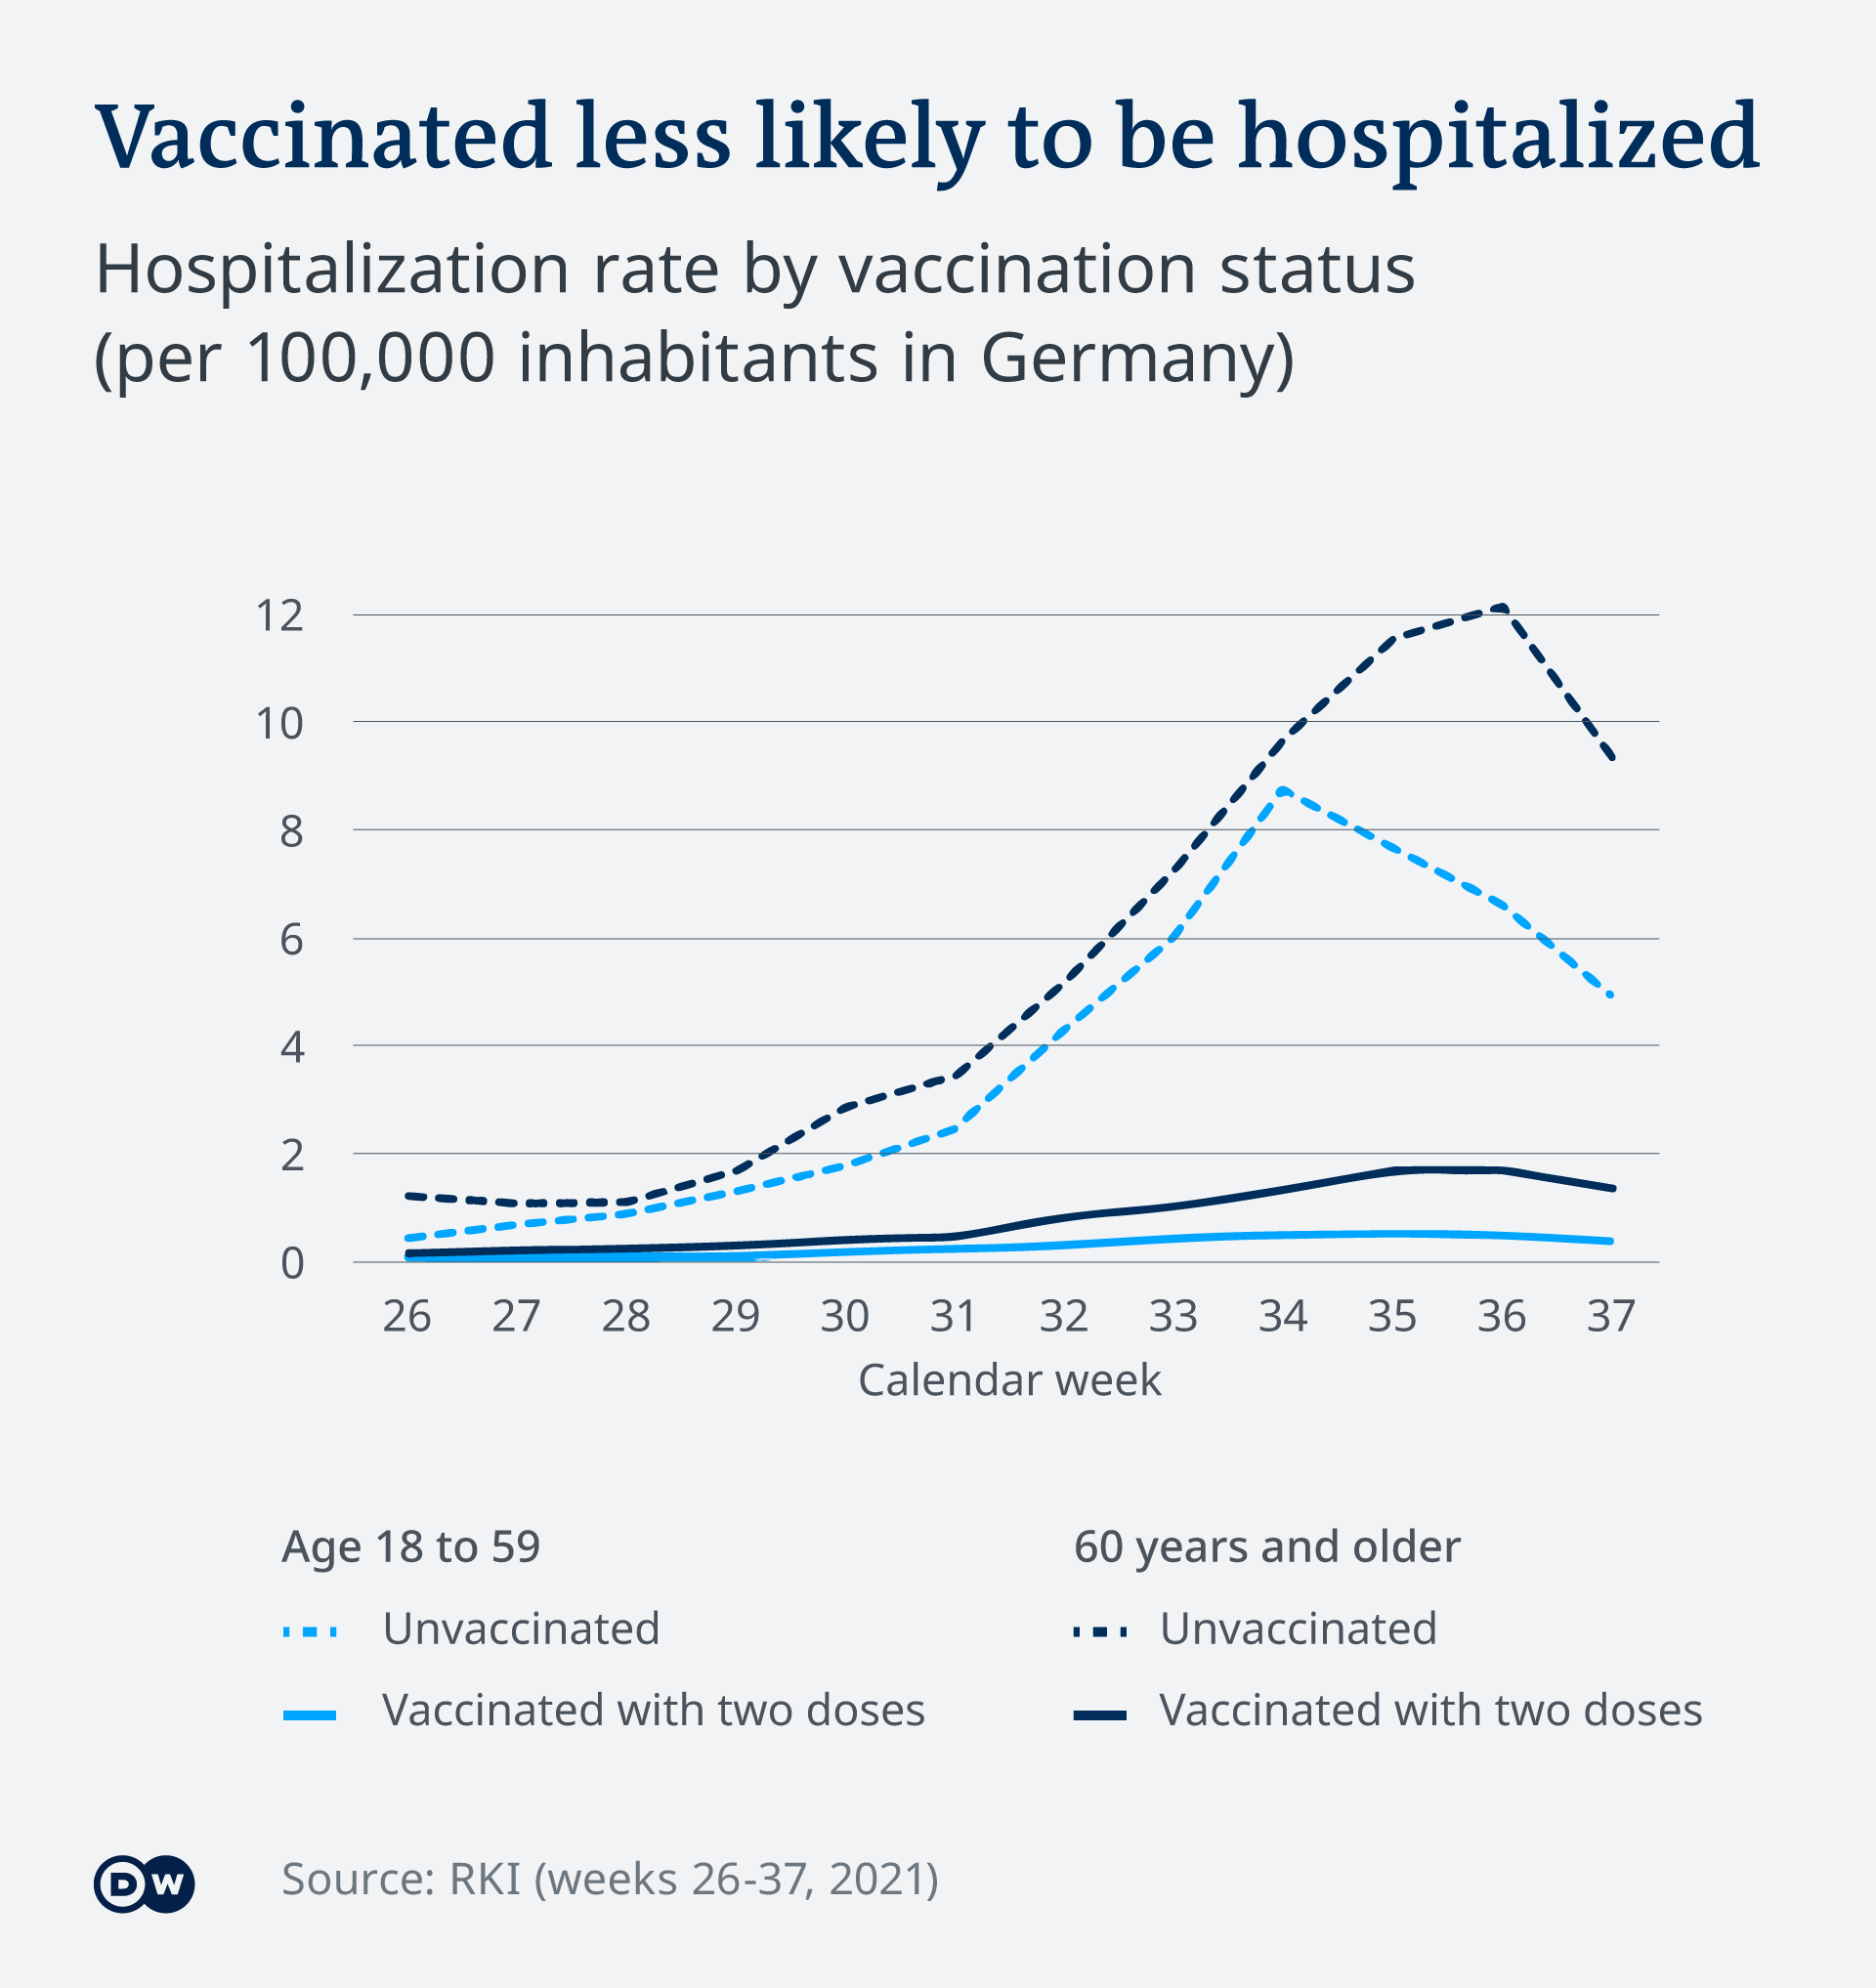 infographic on vaccinations and hospitalization rate